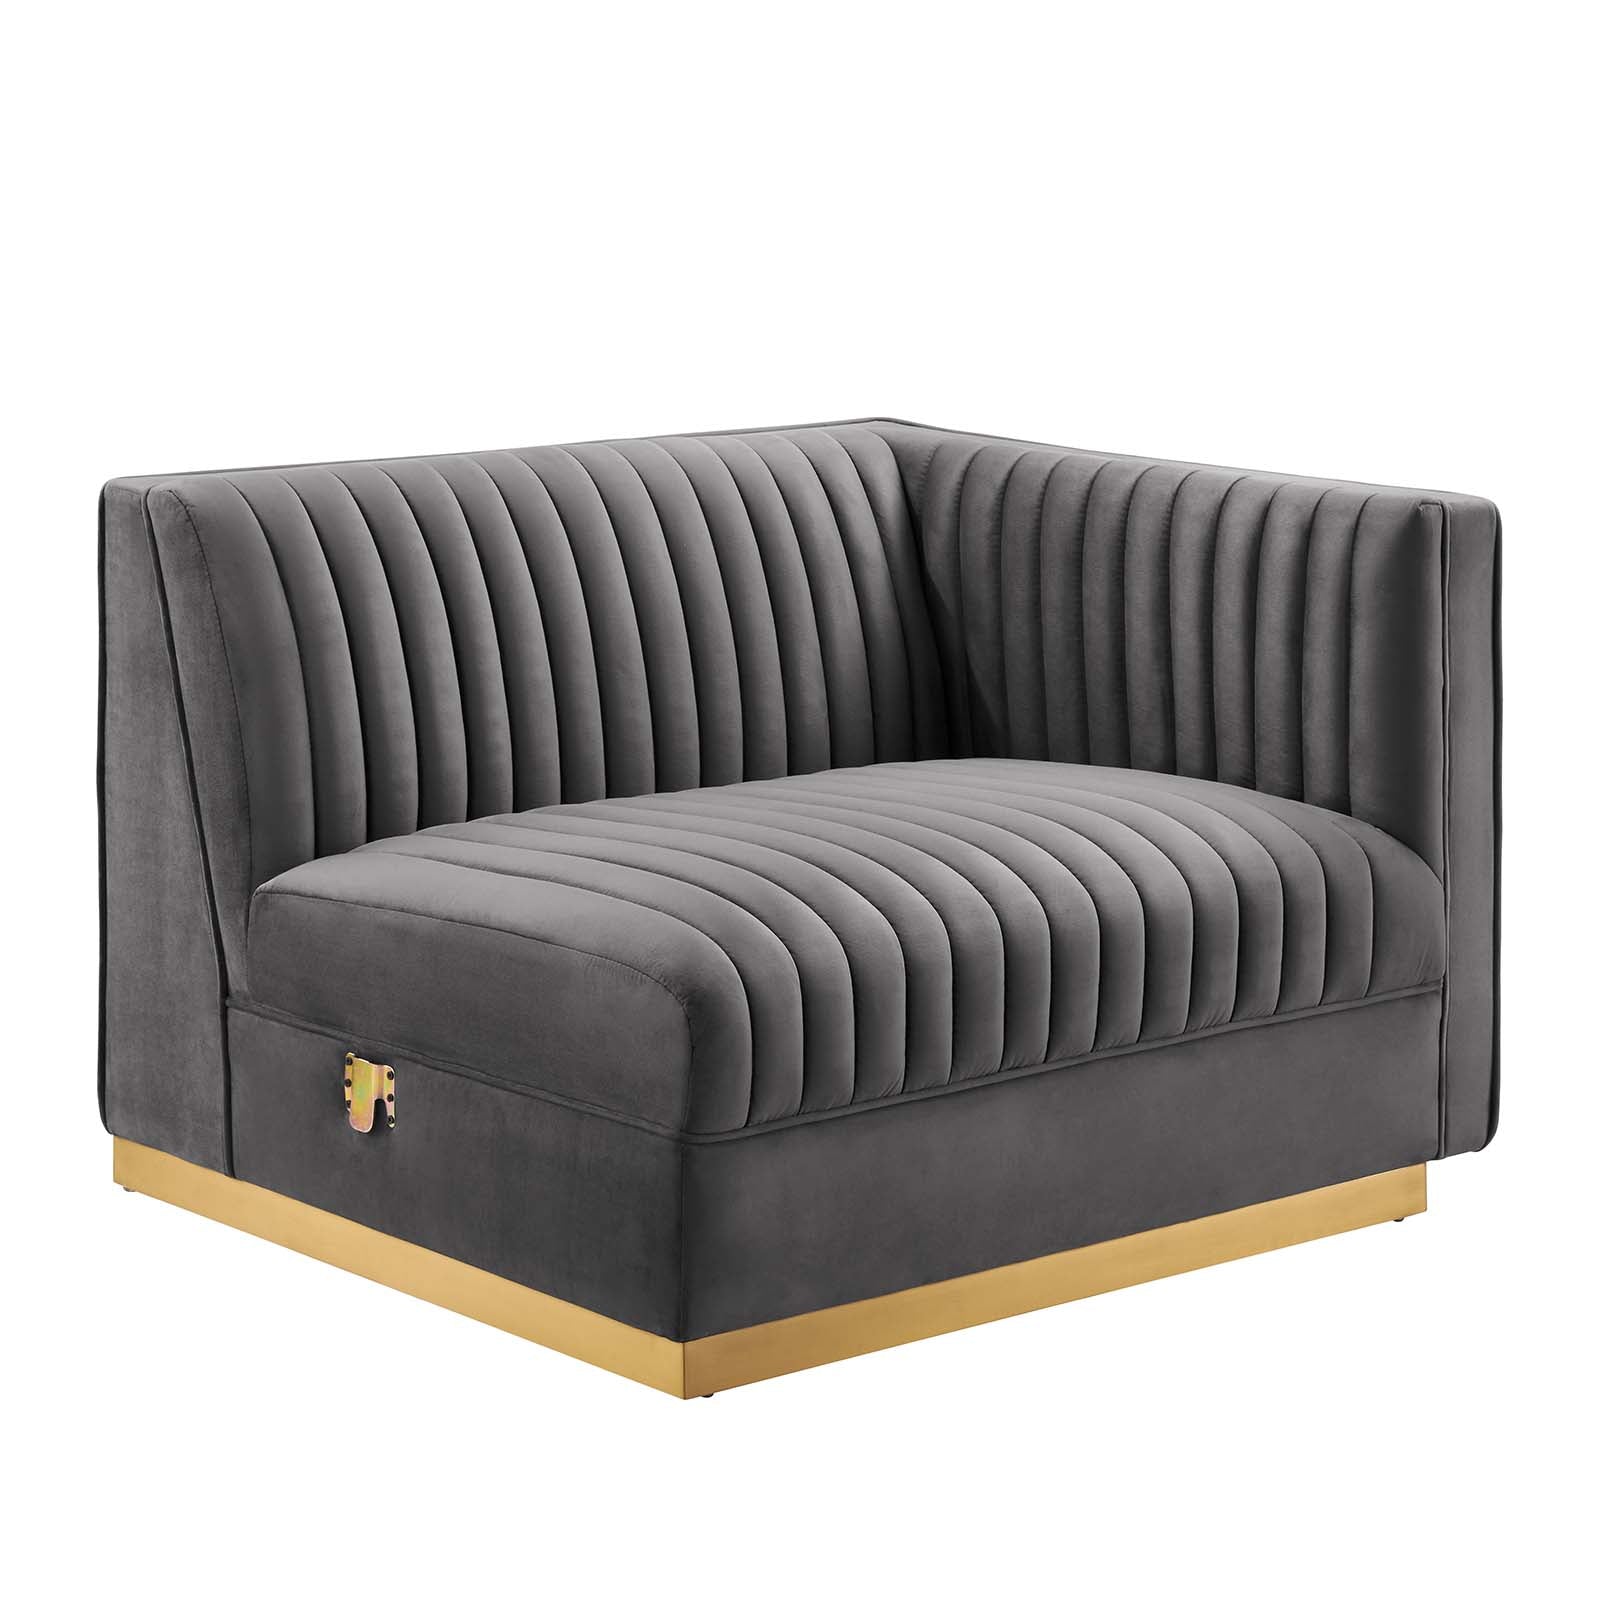 Sanguine Channel Tufted Performance Velvet Modular Sectional Sofa Right-Arm Chair-Corner Chair-Modway-Wall2Wall Furnishings